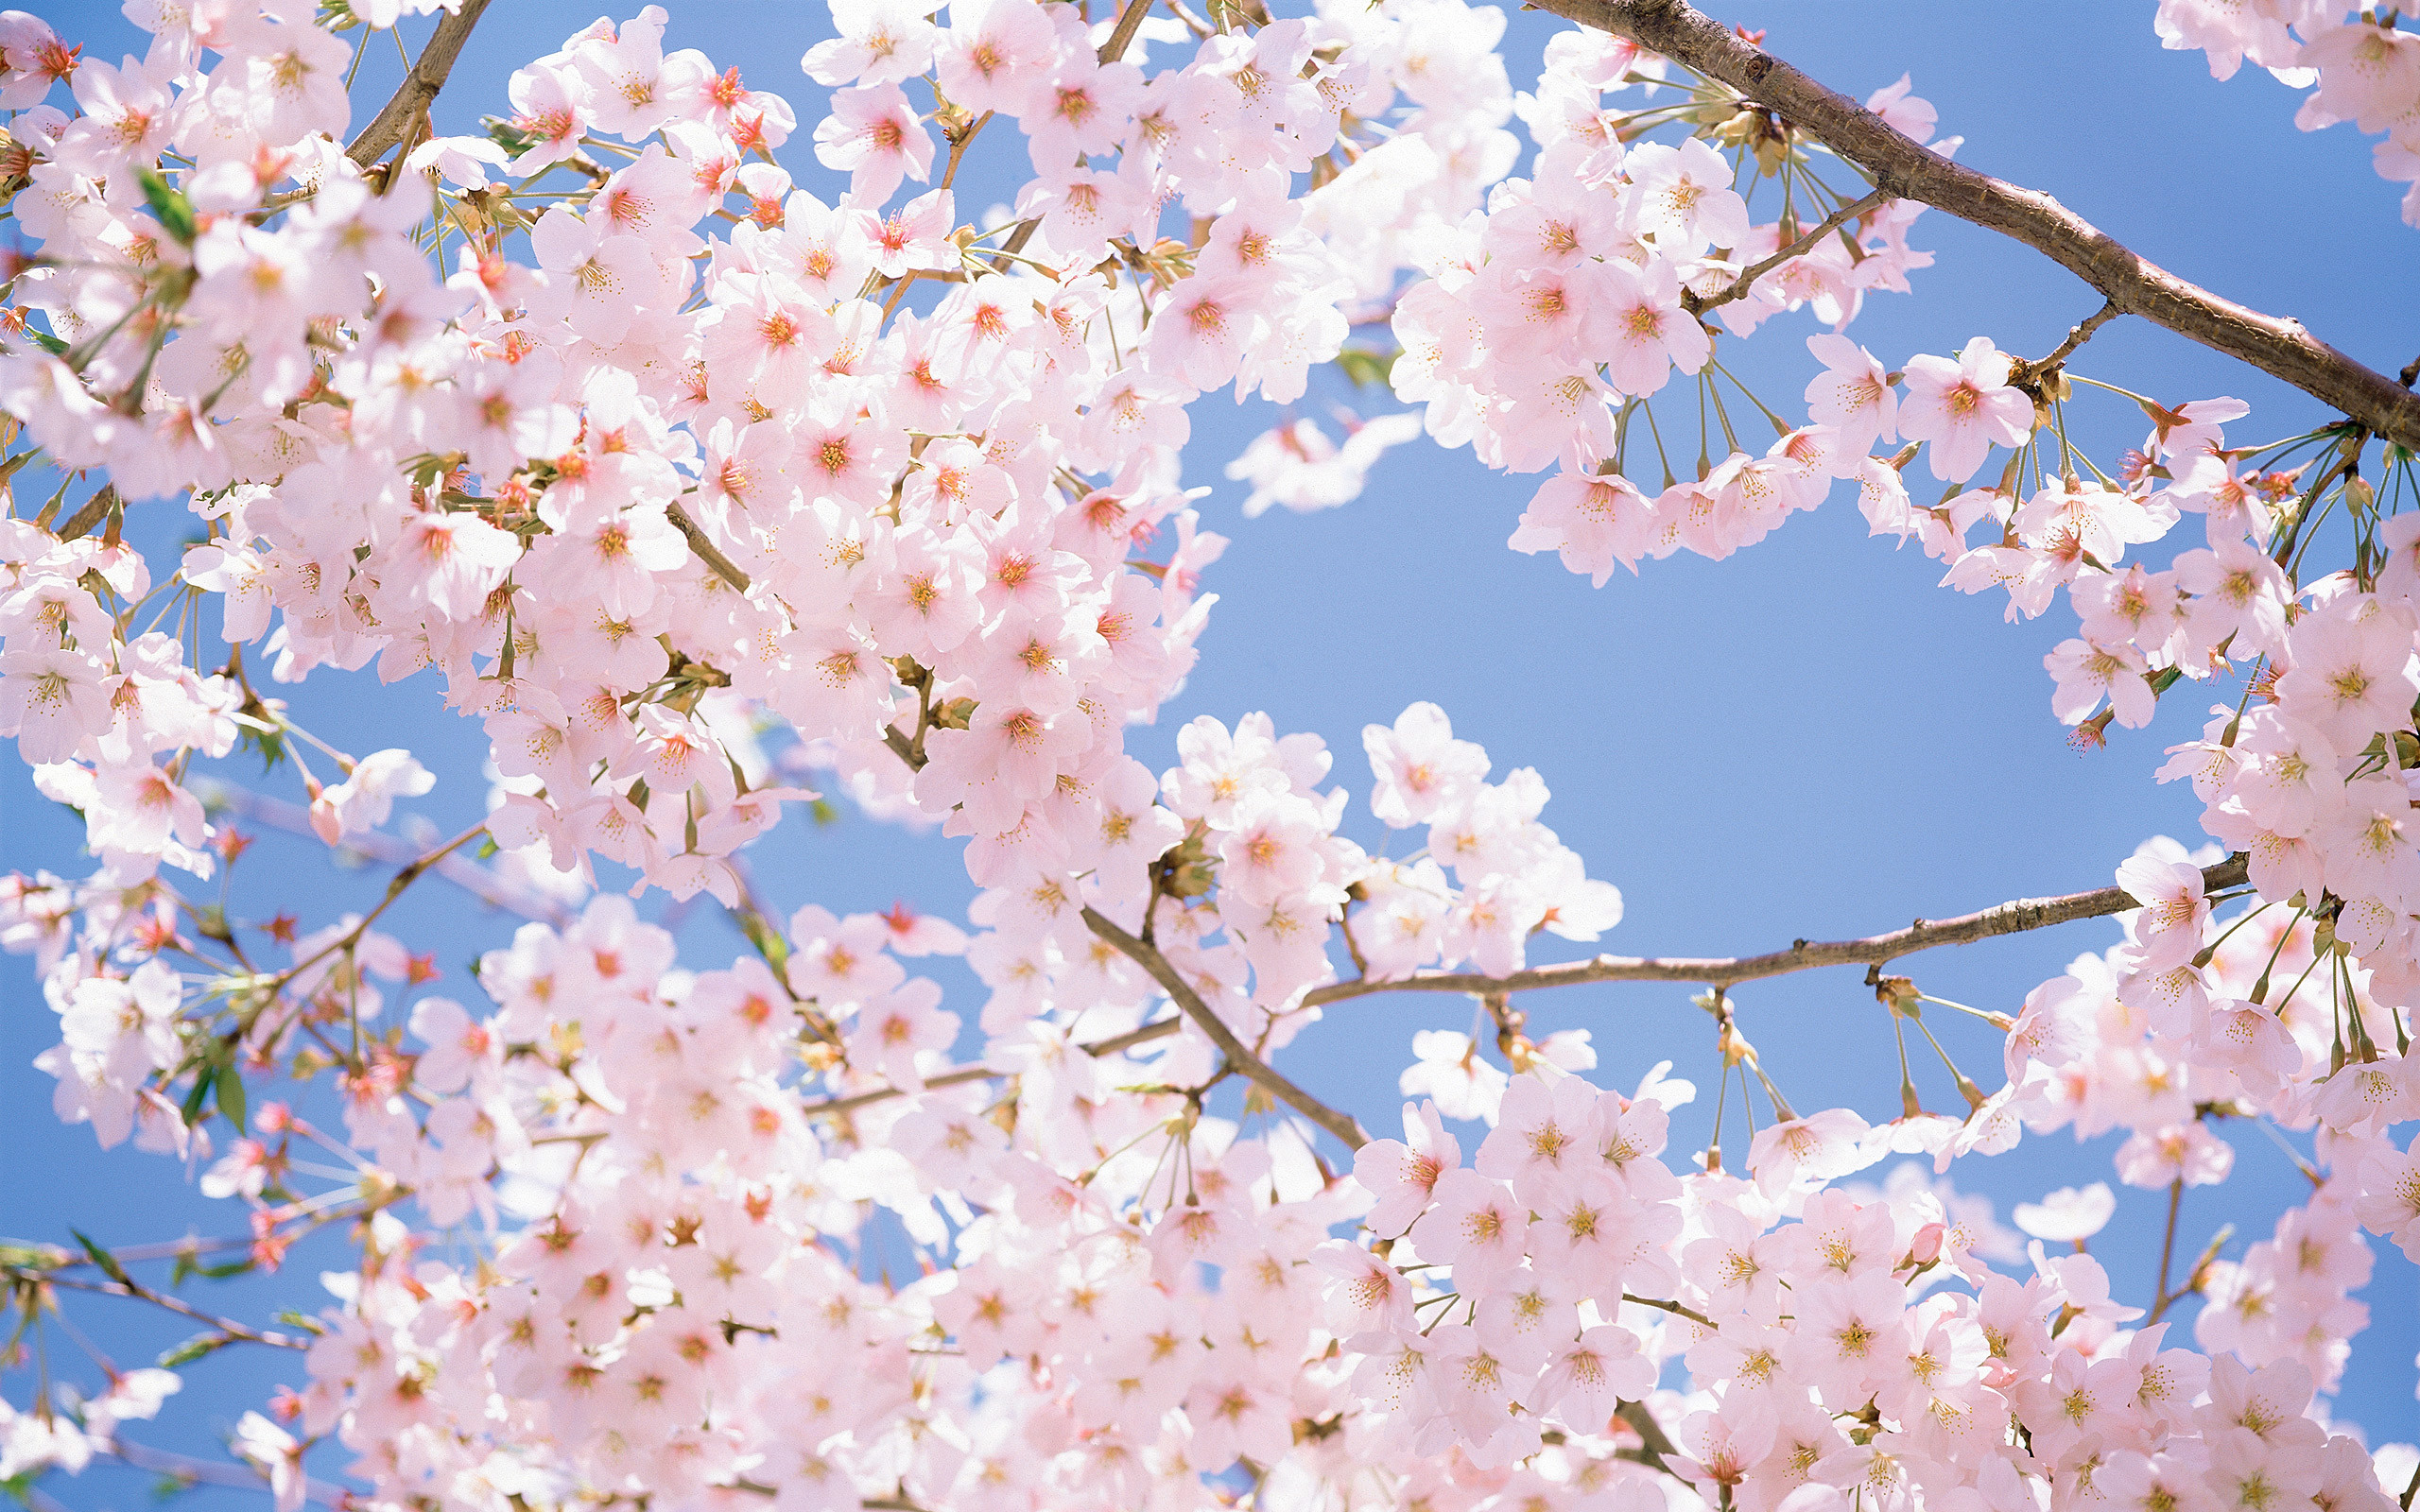 2560x1600 Flowers Cherry Blossom Wallpapers Images Desktop Free Hd Photos Cherry  Blossom